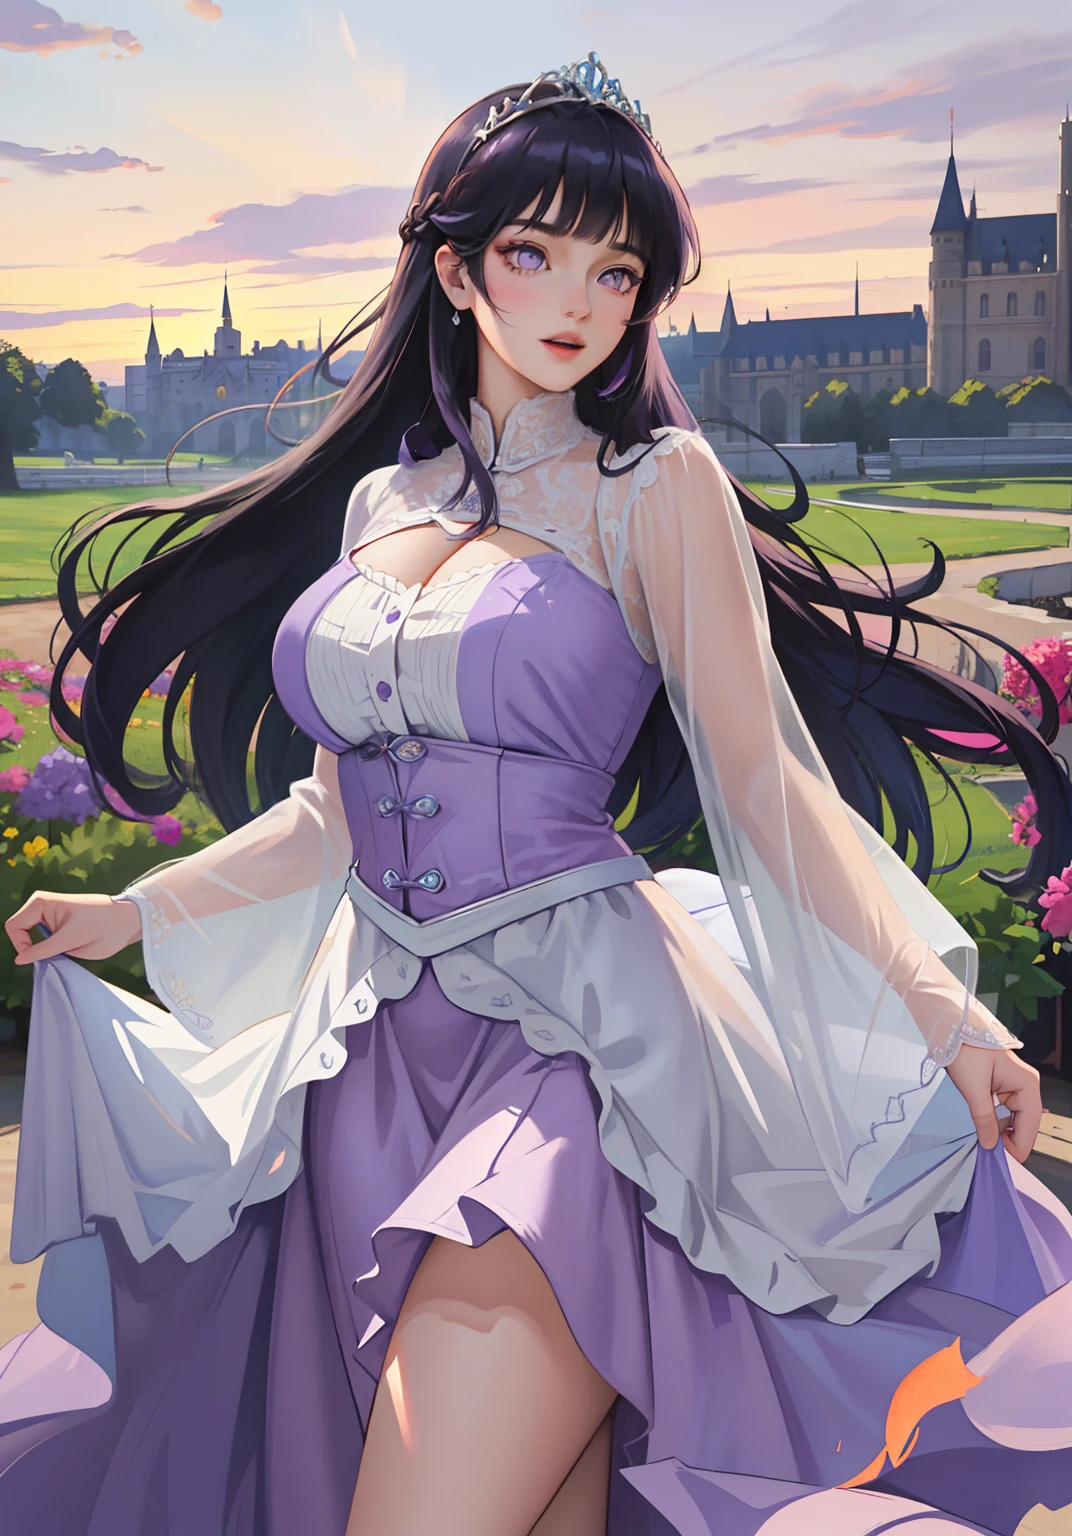 (RapunzelWaifu:1), surprised, beautiful pose, looking at the viewer, thick thighs, (long soft purple dress:1.2), (very very long hair, tiara) :D,curvy,

(realistic: 1.2), (realism), (masterpiece: 1.2), (best quality), (ultra detailed), (8k, 4k, intricate), (full-body-shot: 1), (Cowboy-shot: 1.2), (85mm), light particles, lighting, (highly detailed: 1.2), (detailed face: 1.2), (gradients), sfw, colorful, (detailed eyes: 1.2),

(detailed landscape, garden, plants, castle: 1.2), (detailed background), detailed landscape, (dynamic angle: 1.2), (dynamic pose: 1.2), (rule of third_composition: 1.3), (line of action: 1.2), wide shot, daylight, soil, Blunt Bangs, purple eyes,dark blue hair